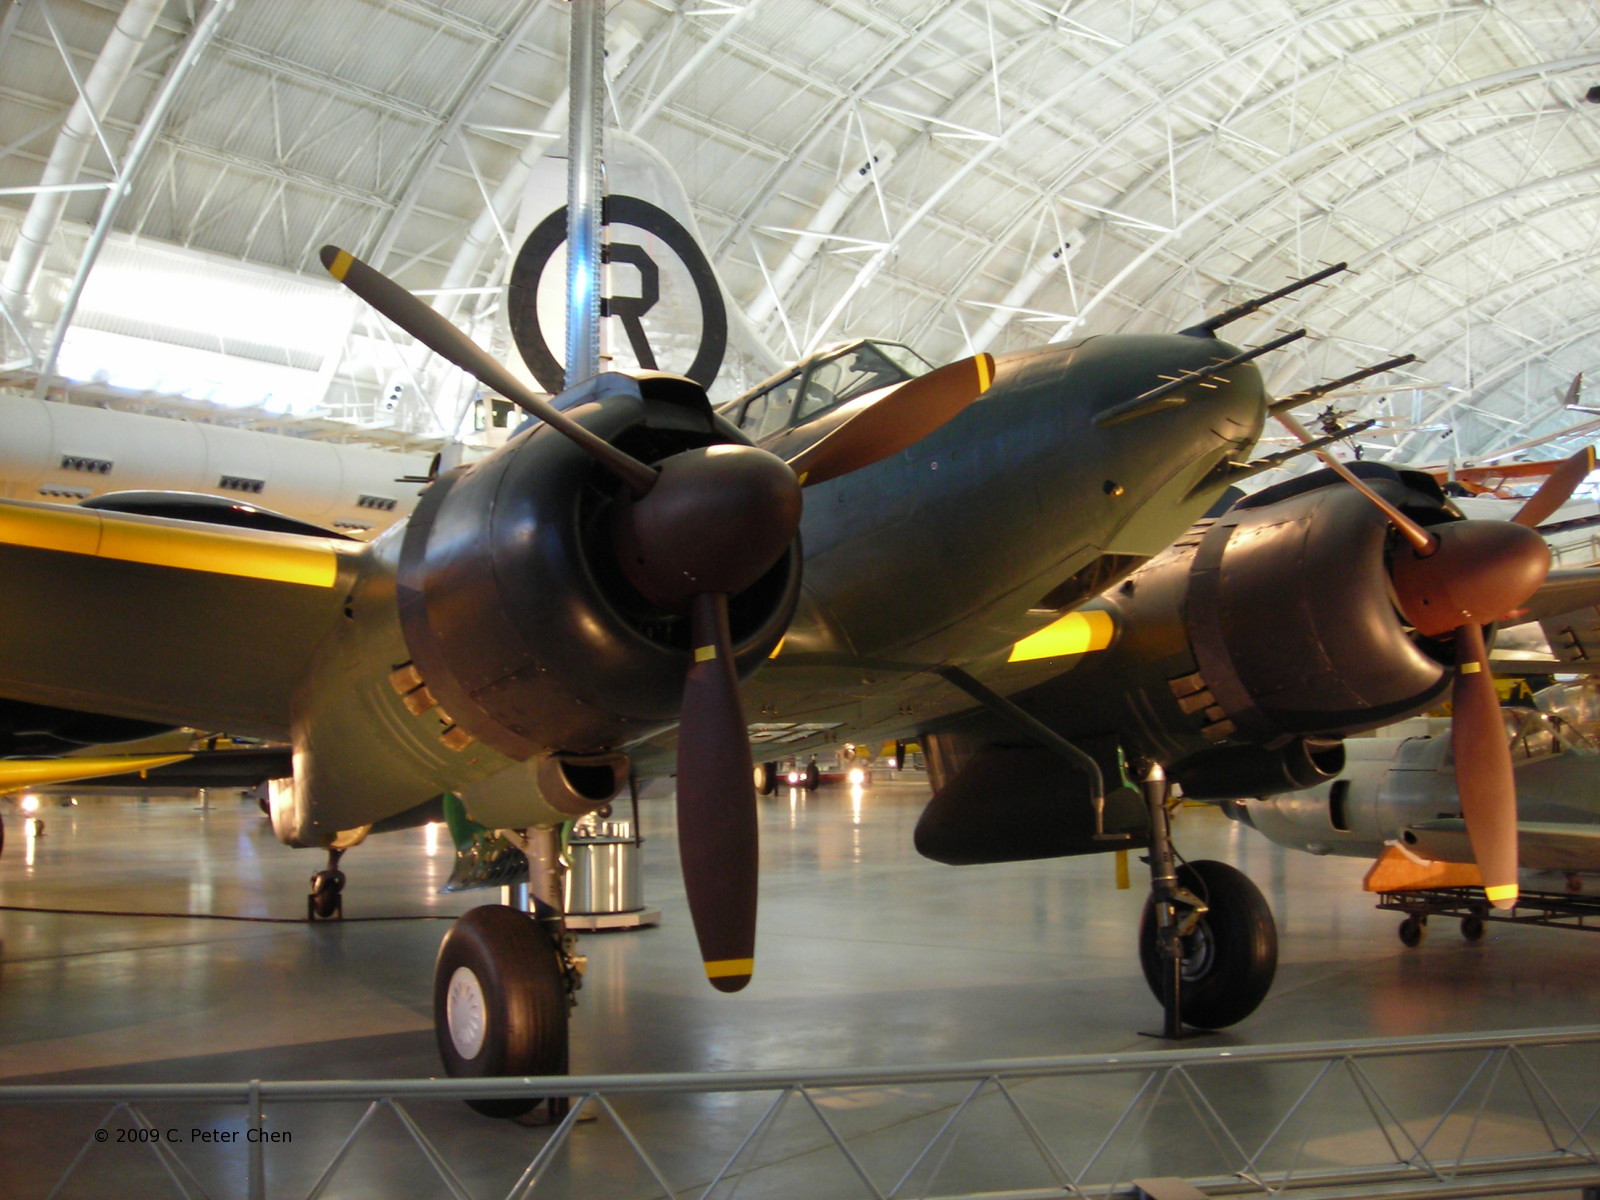 J1N1-S Gekko night fighter on display at the Smithsonian Air and Space Museum Udvar-Hazy Center, Chantilly, Virginia, United States, 26 Apr 2009